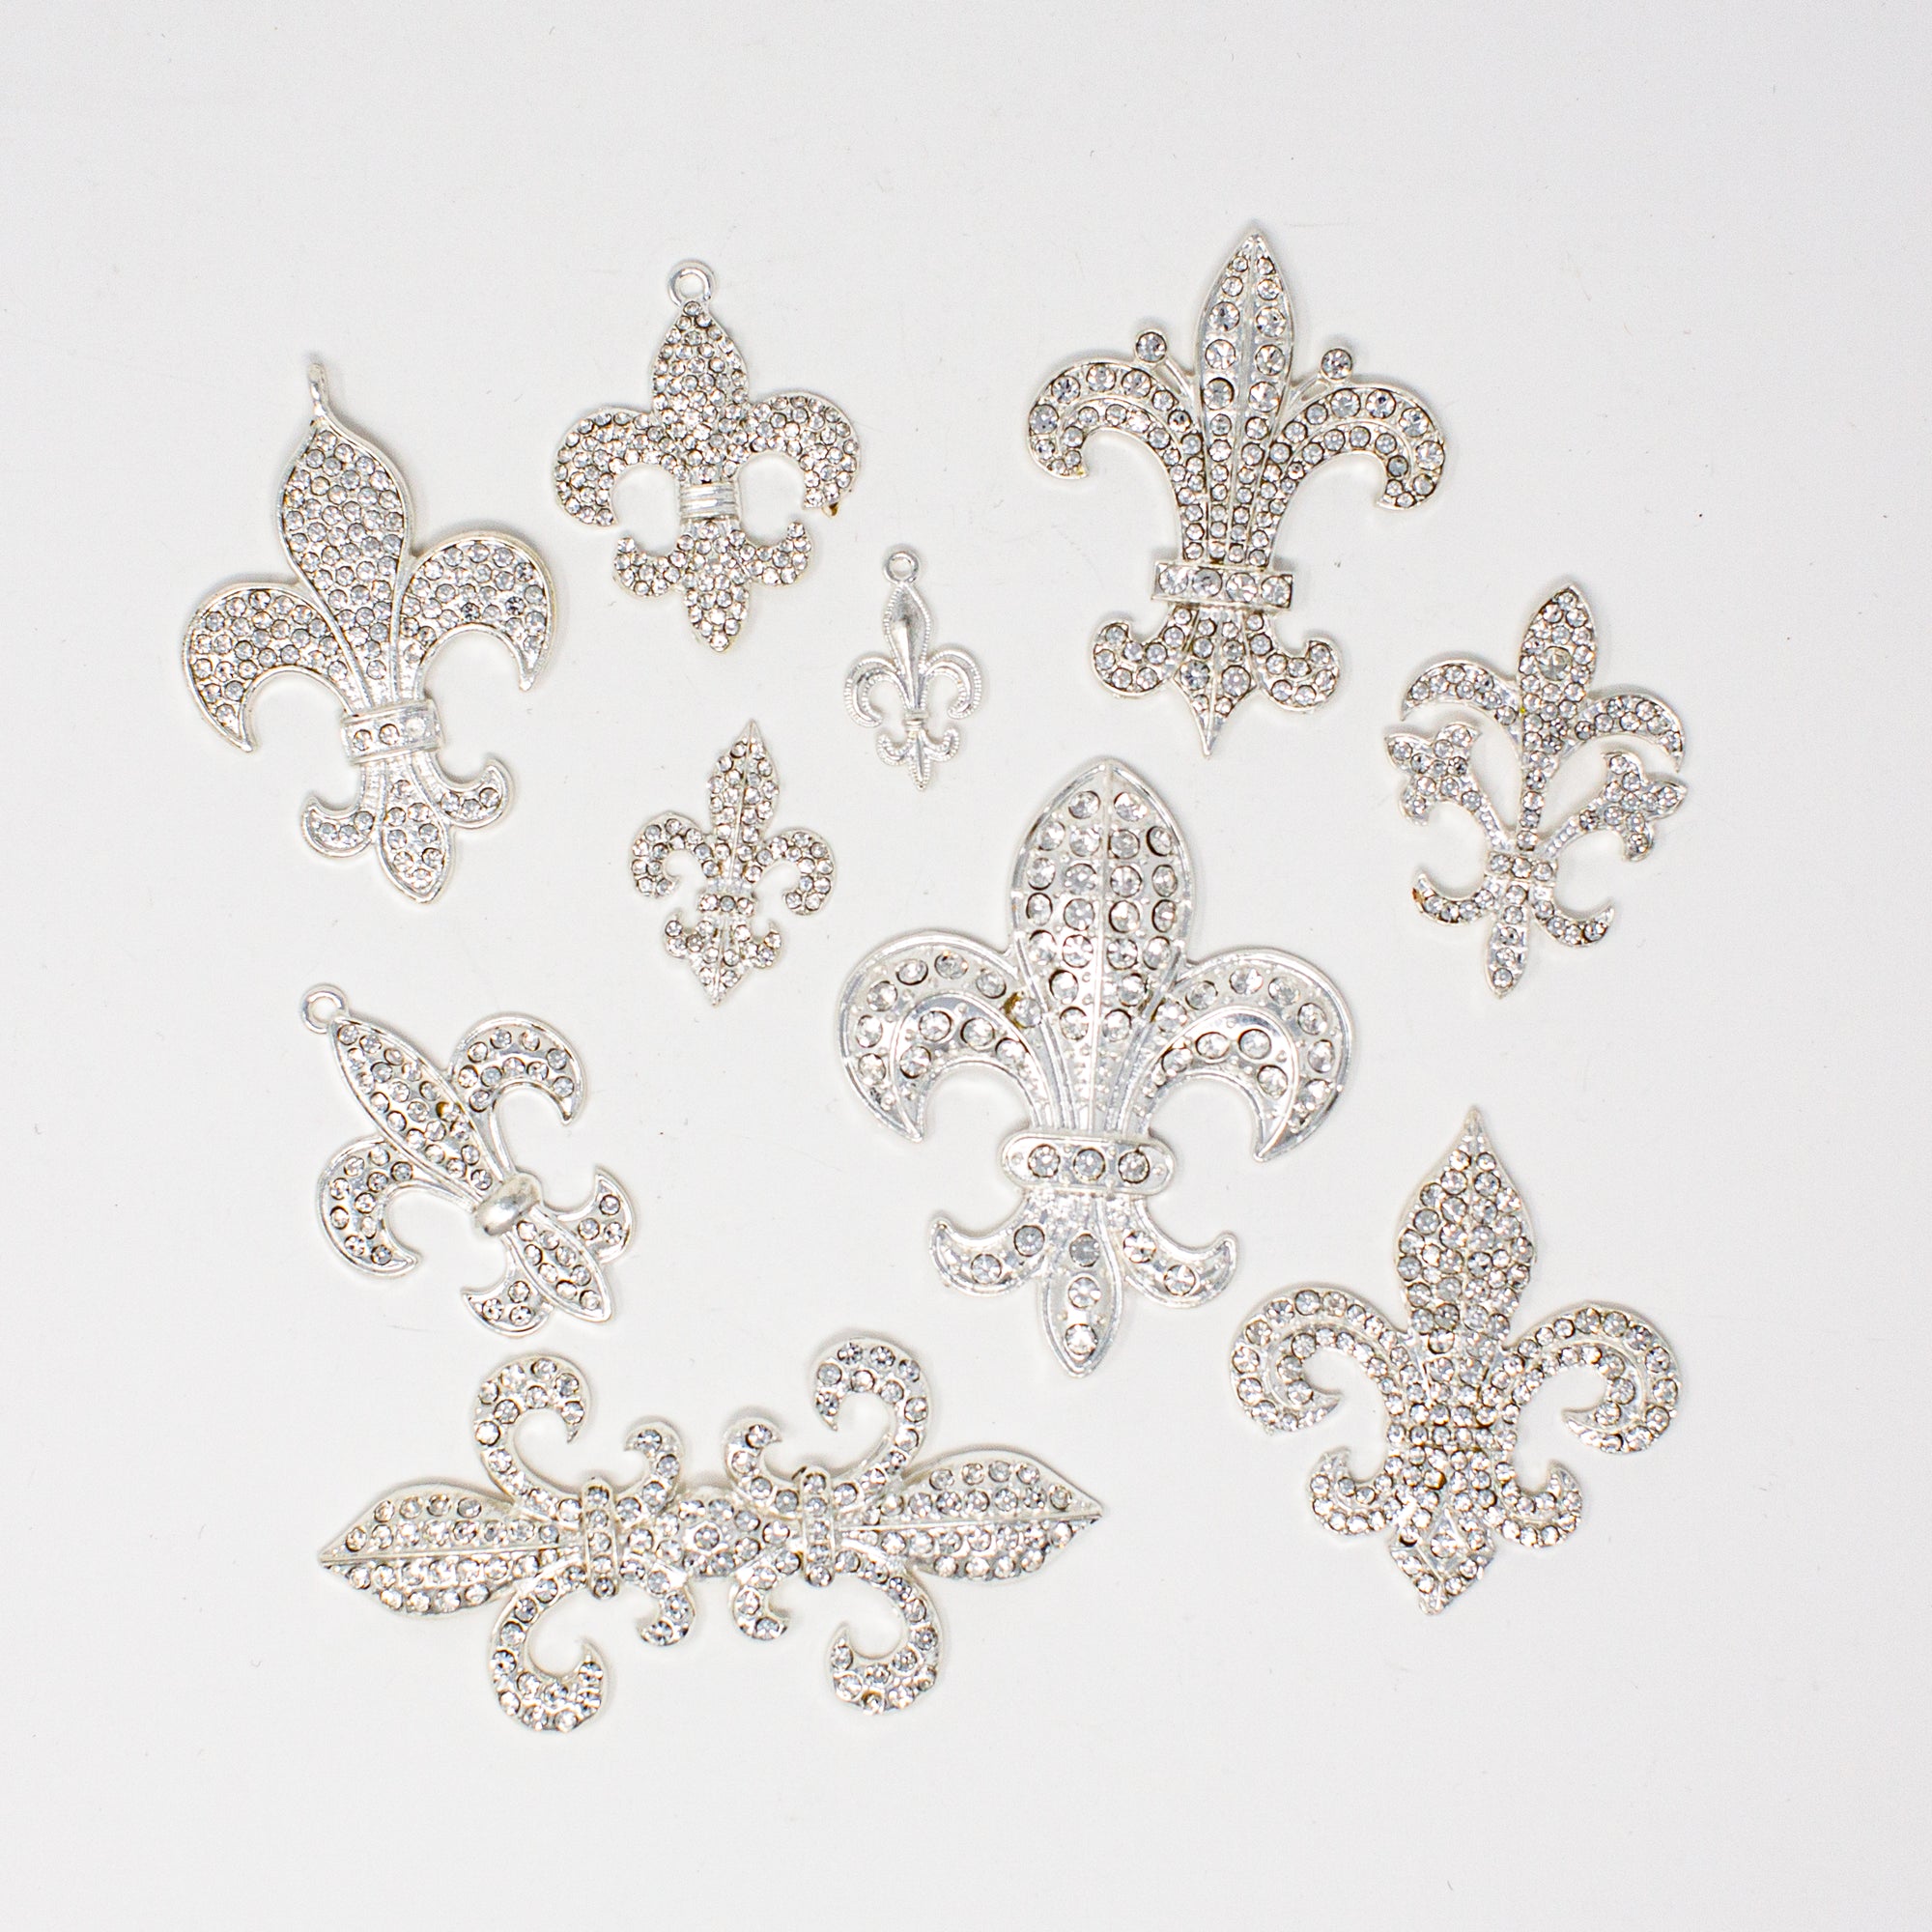 fleur de lis embellishments for crafts and diy french style rhinestone bling embellishments